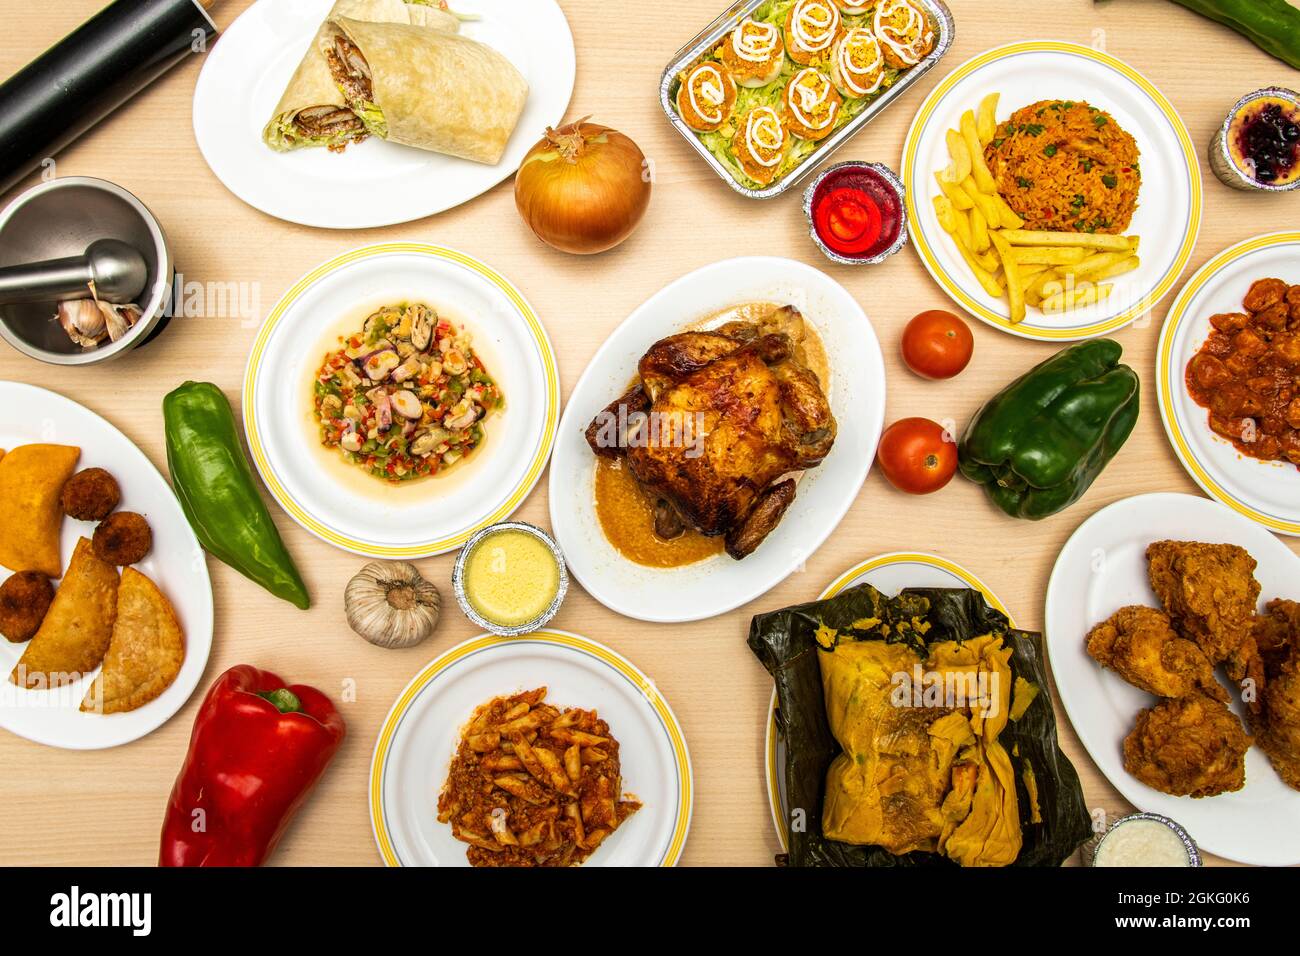 Top view image of set of dishes with recipes of European and Latin food on wooden table, tamales, empanadas, salpicon, roast chicken, burritos, Italia Stock Photo